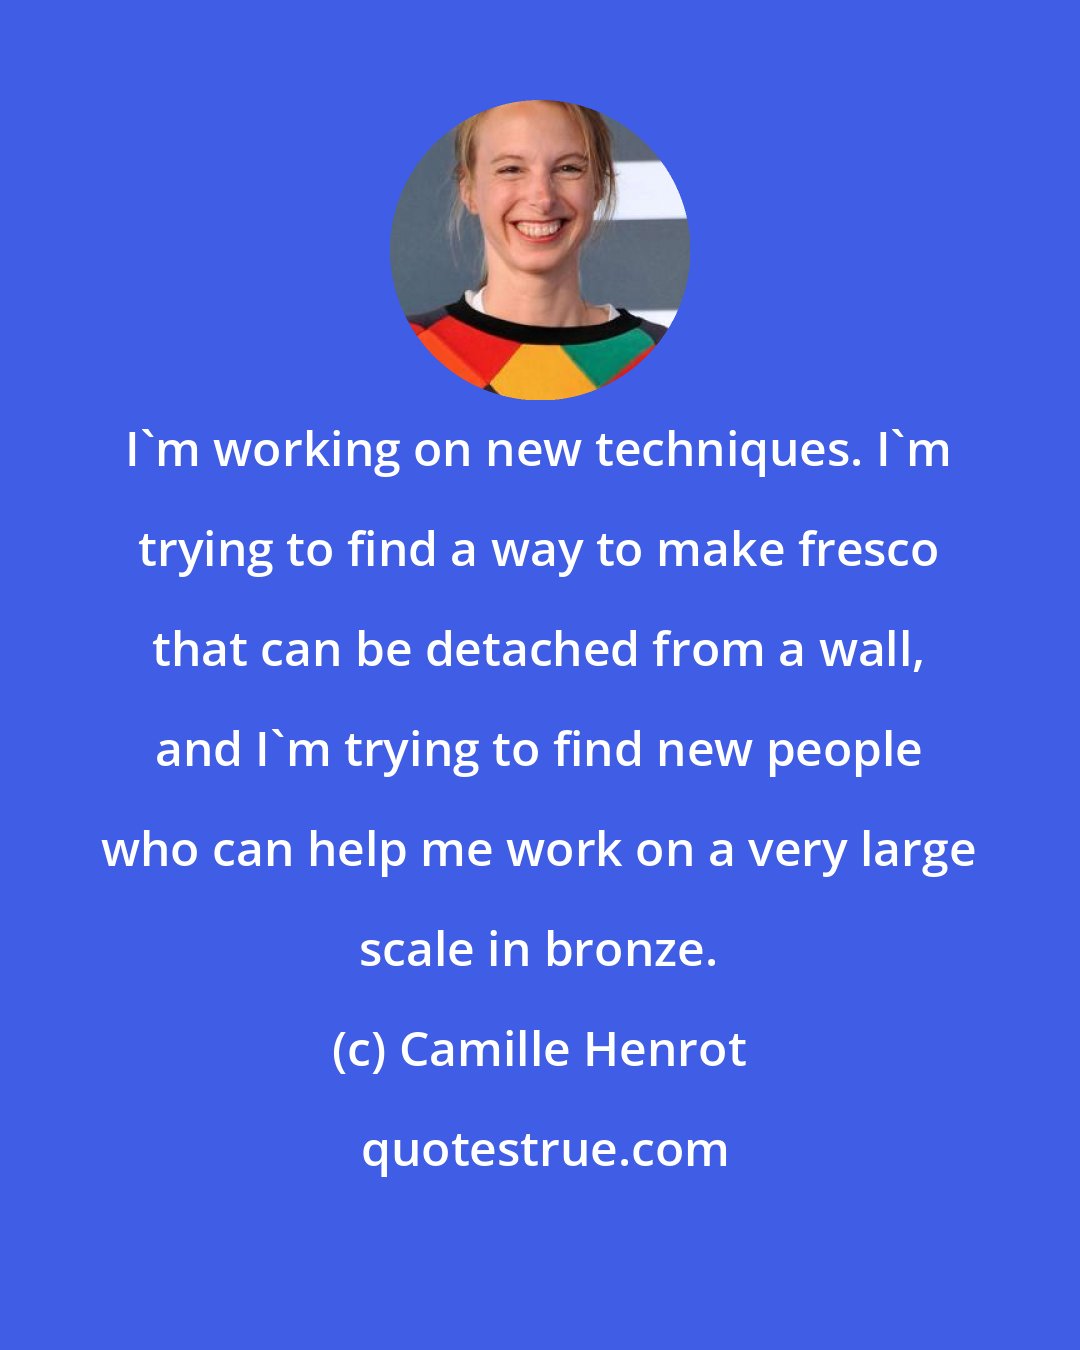 Camille Henrot: I'm working on new techniques. I'm trying to find a way to make fresco that can be detached from a wall, and I'm trying to find new people who can help me work on a very large scale in bronze.